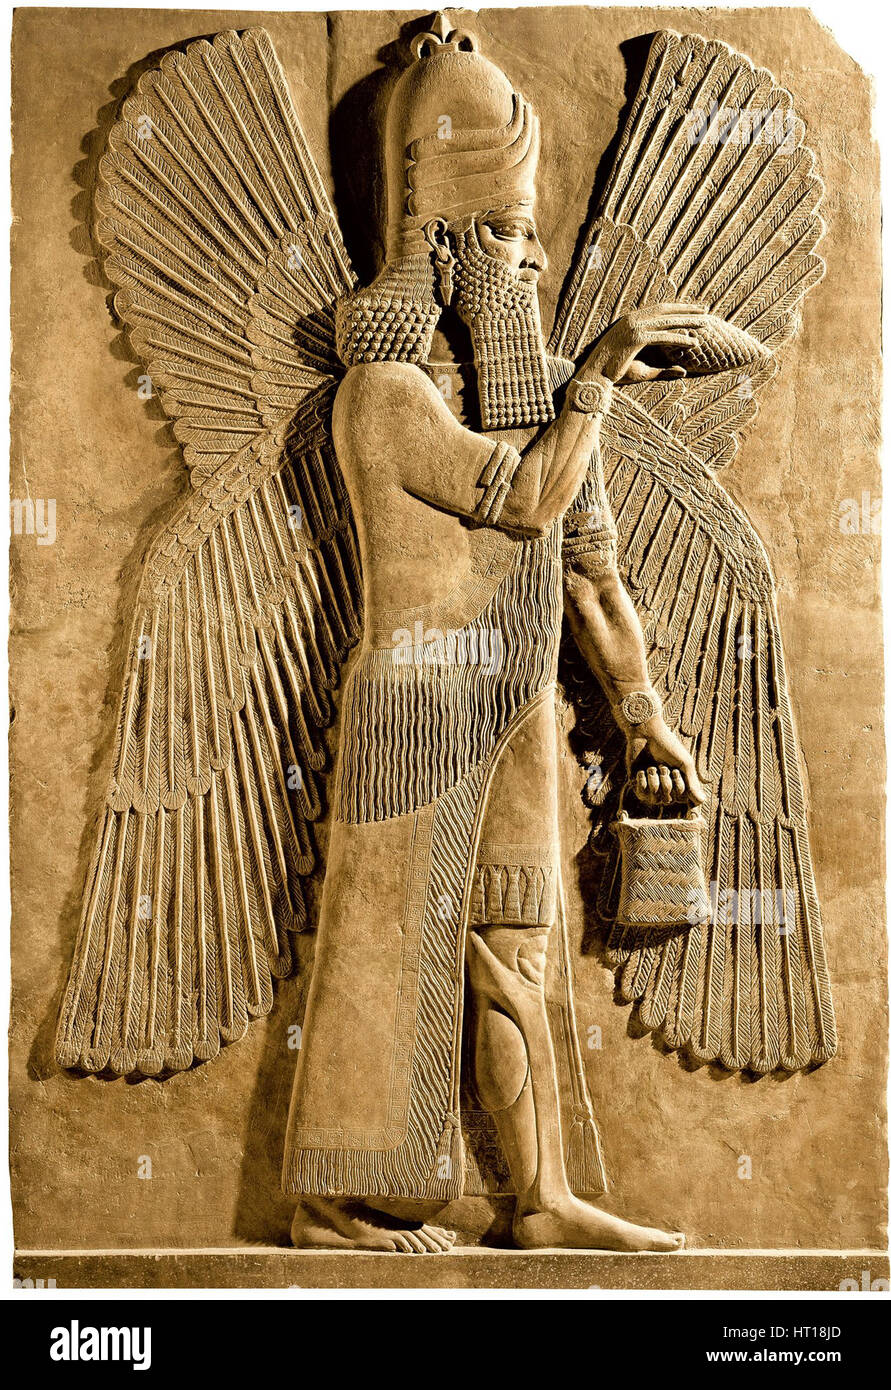 Winged genie. Detail of a relief from the palace of Assyrian king Sargon II, 722-705 BC. Artist: Assyrian Art Stock Photo